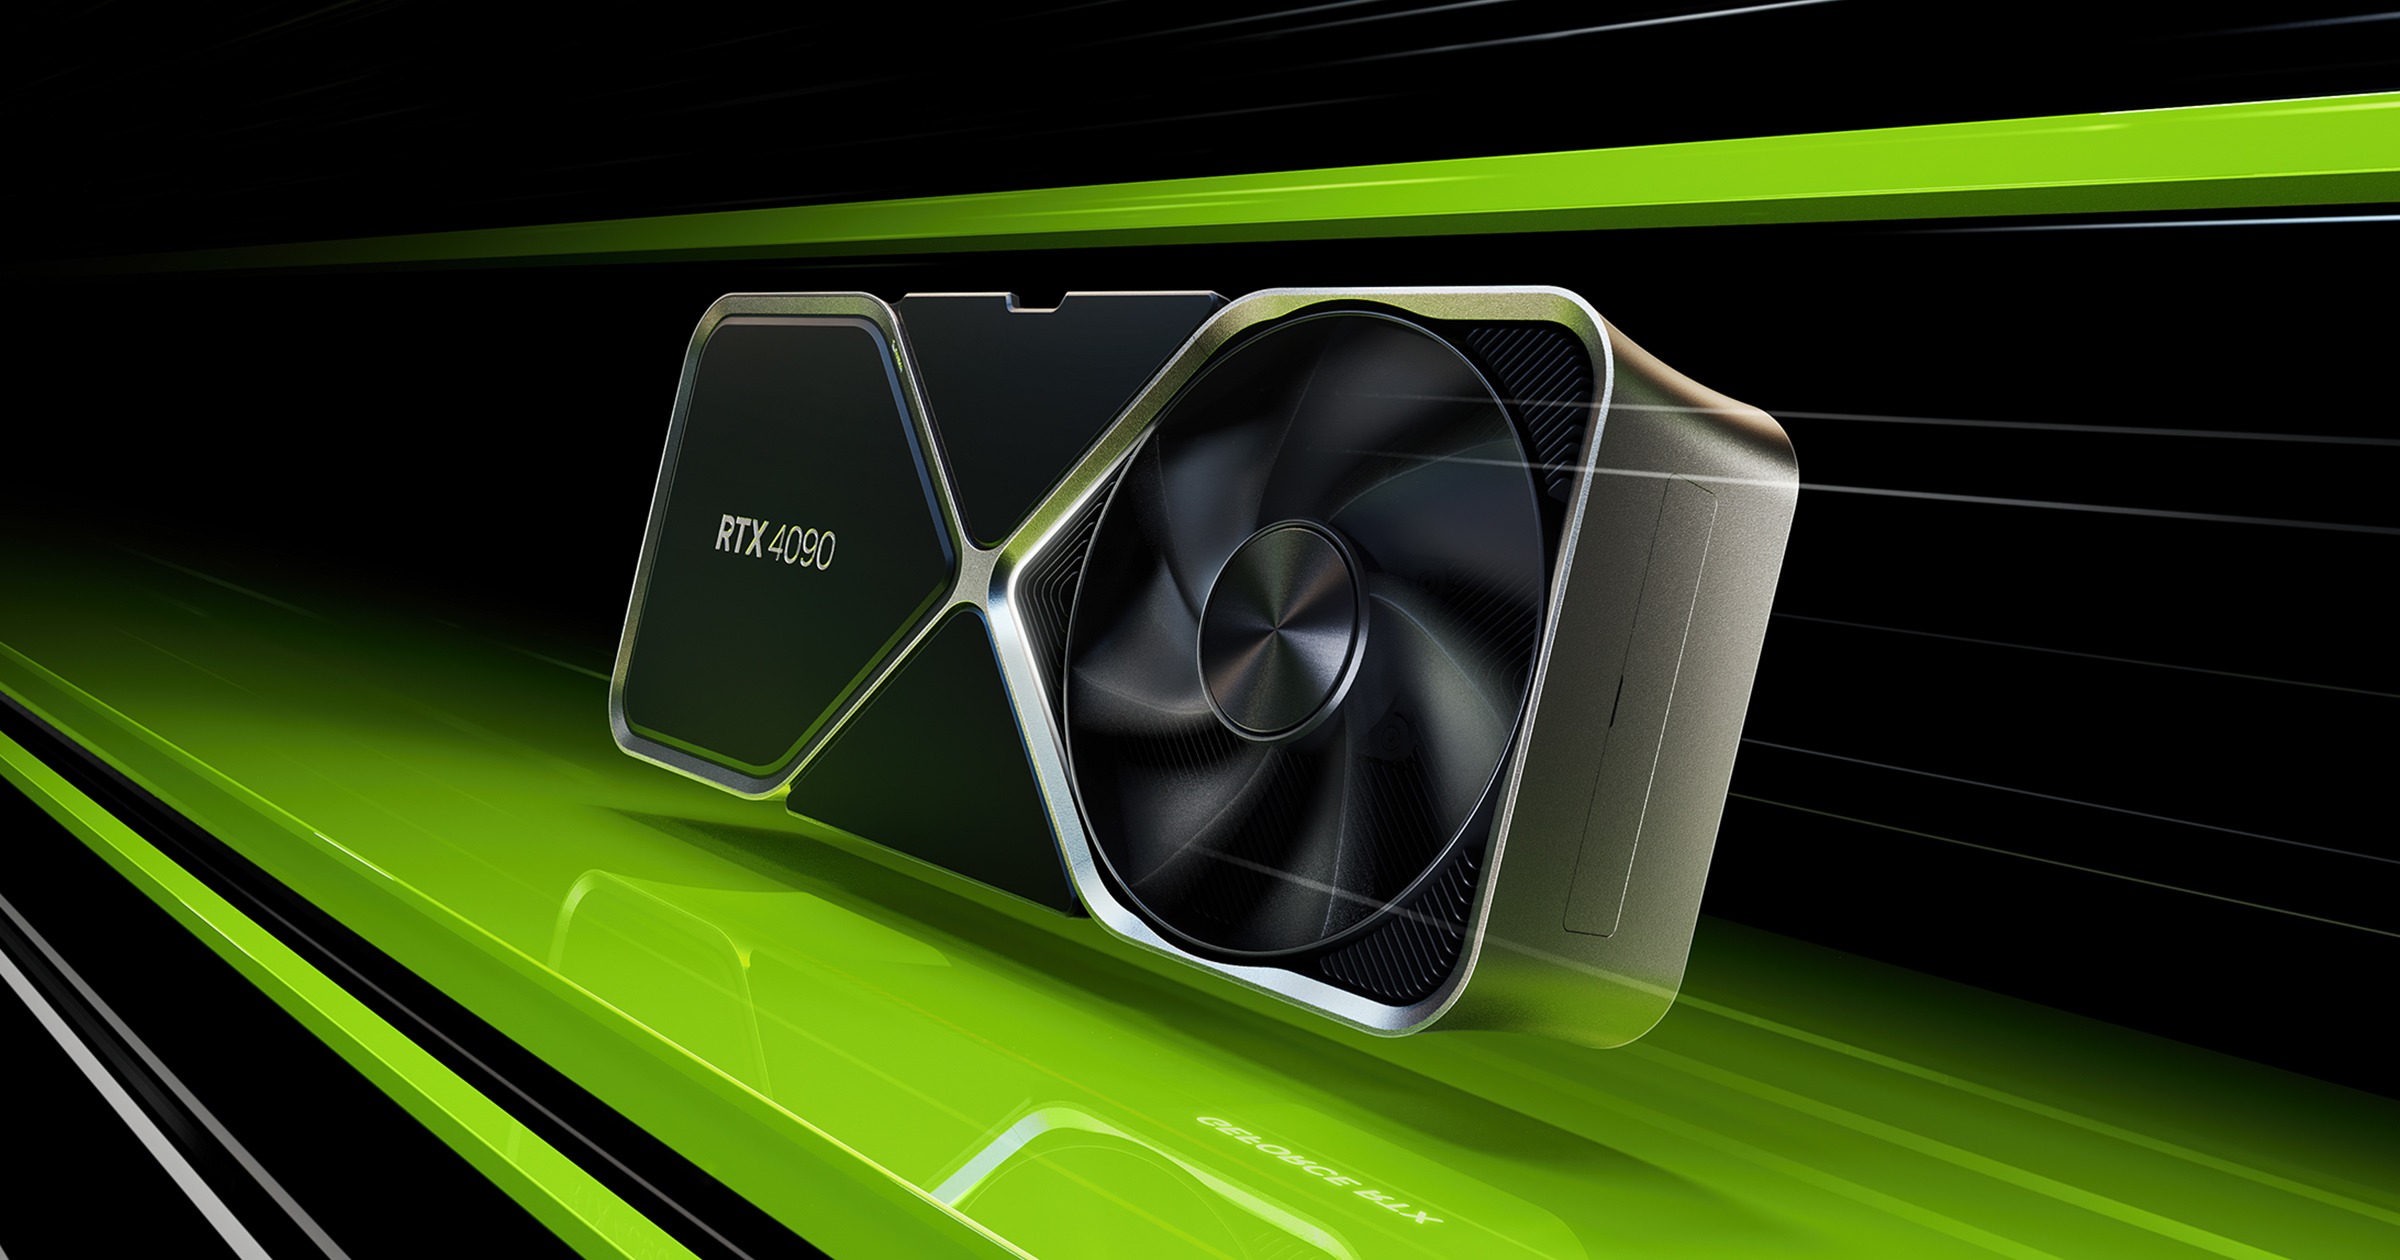 Graphics Cards by GeForce